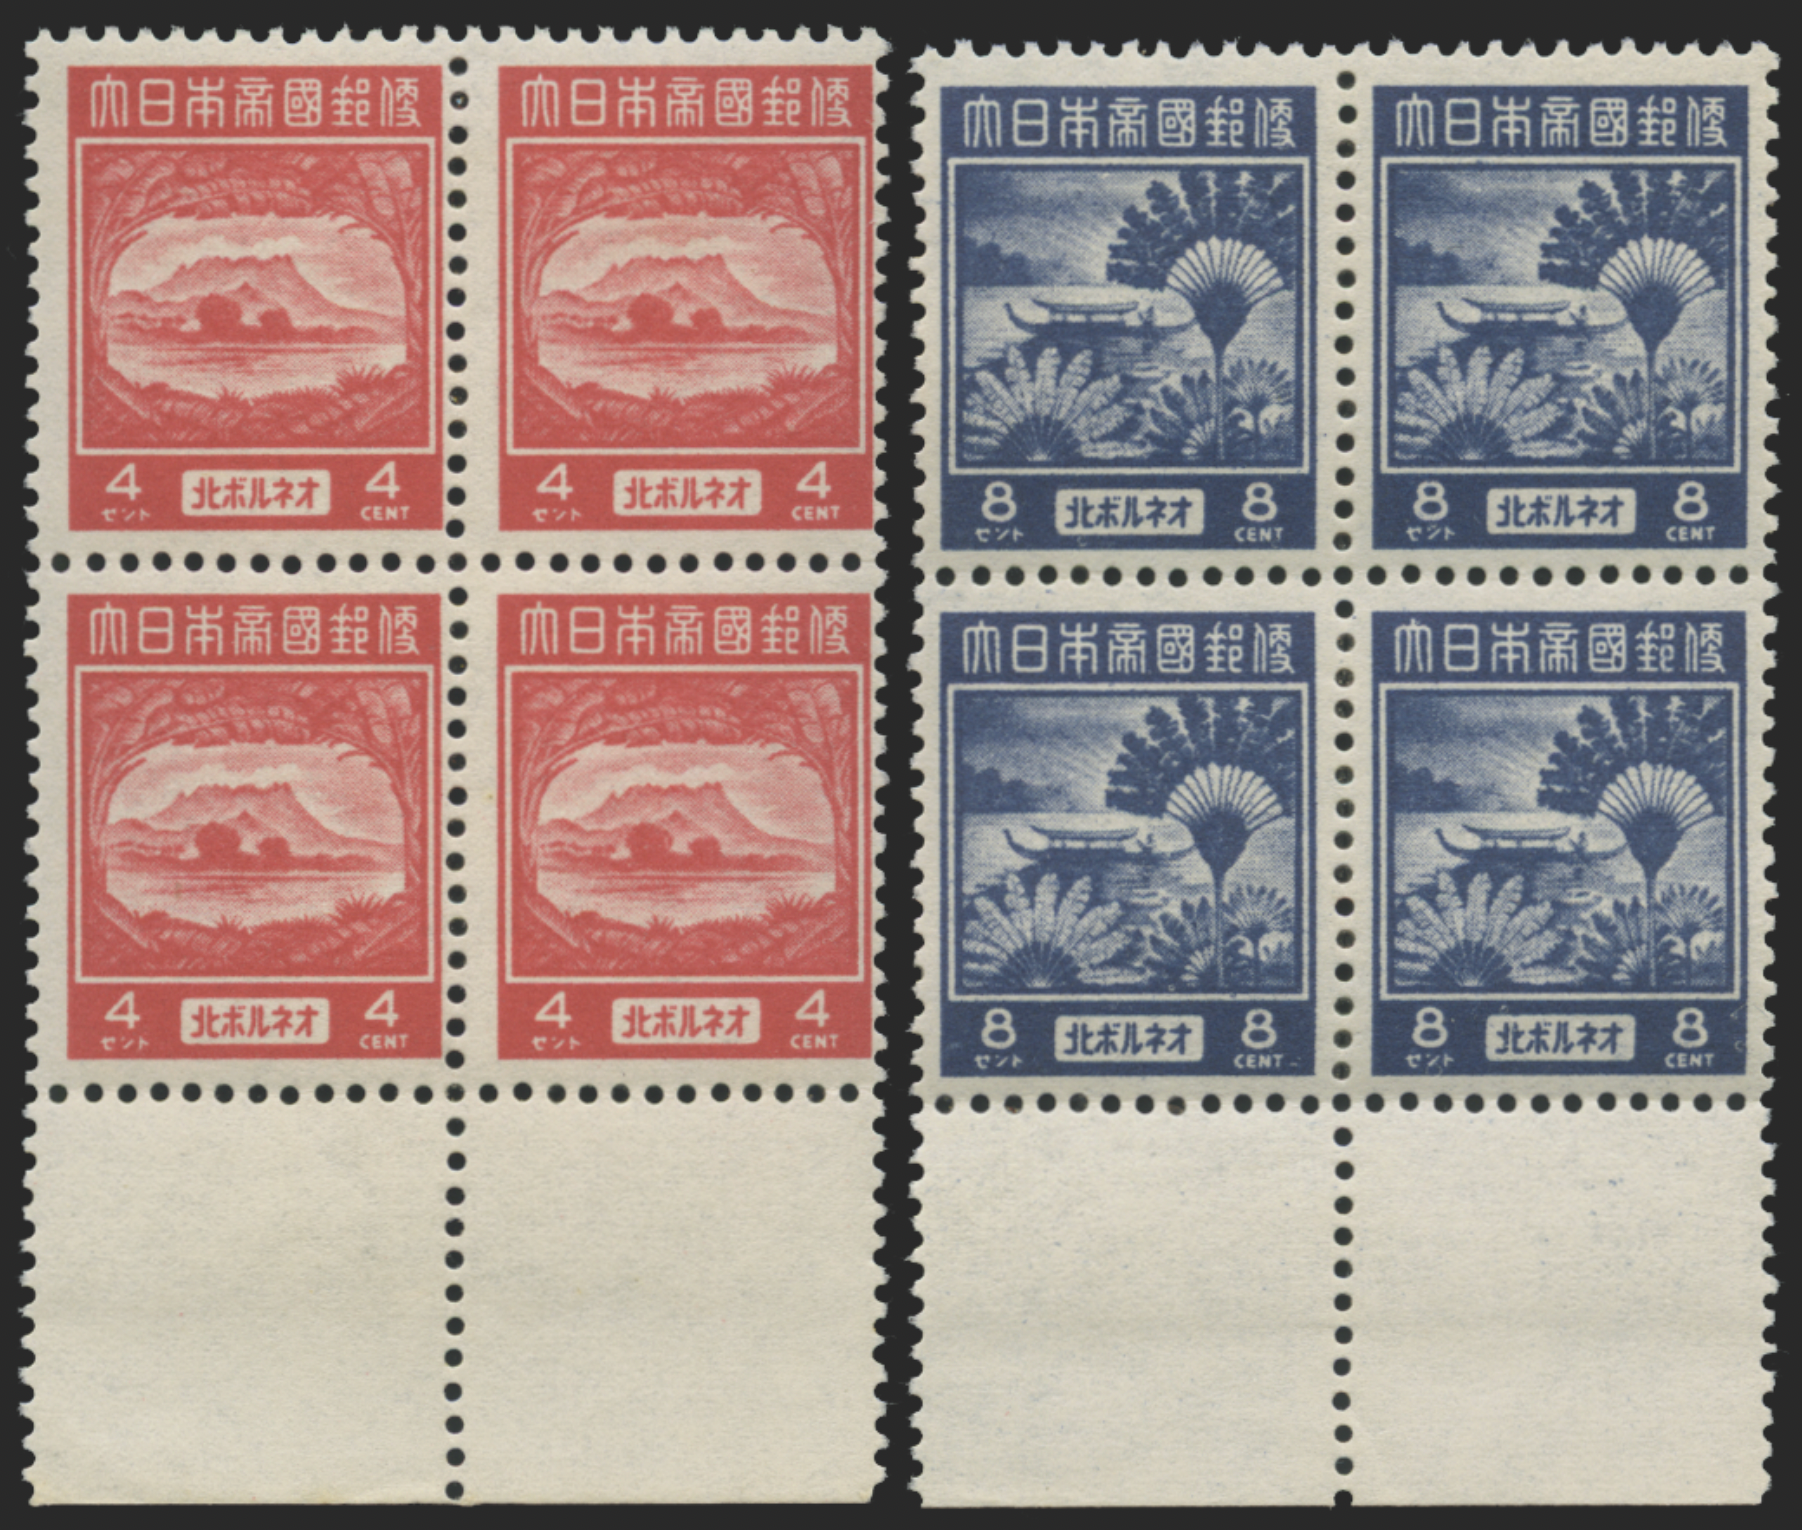 North Borneo Japanese Occupation 1943 (29 Apr) 4c red and 8c blue, matching lower marginal blocks of 4, SGJ18/19.